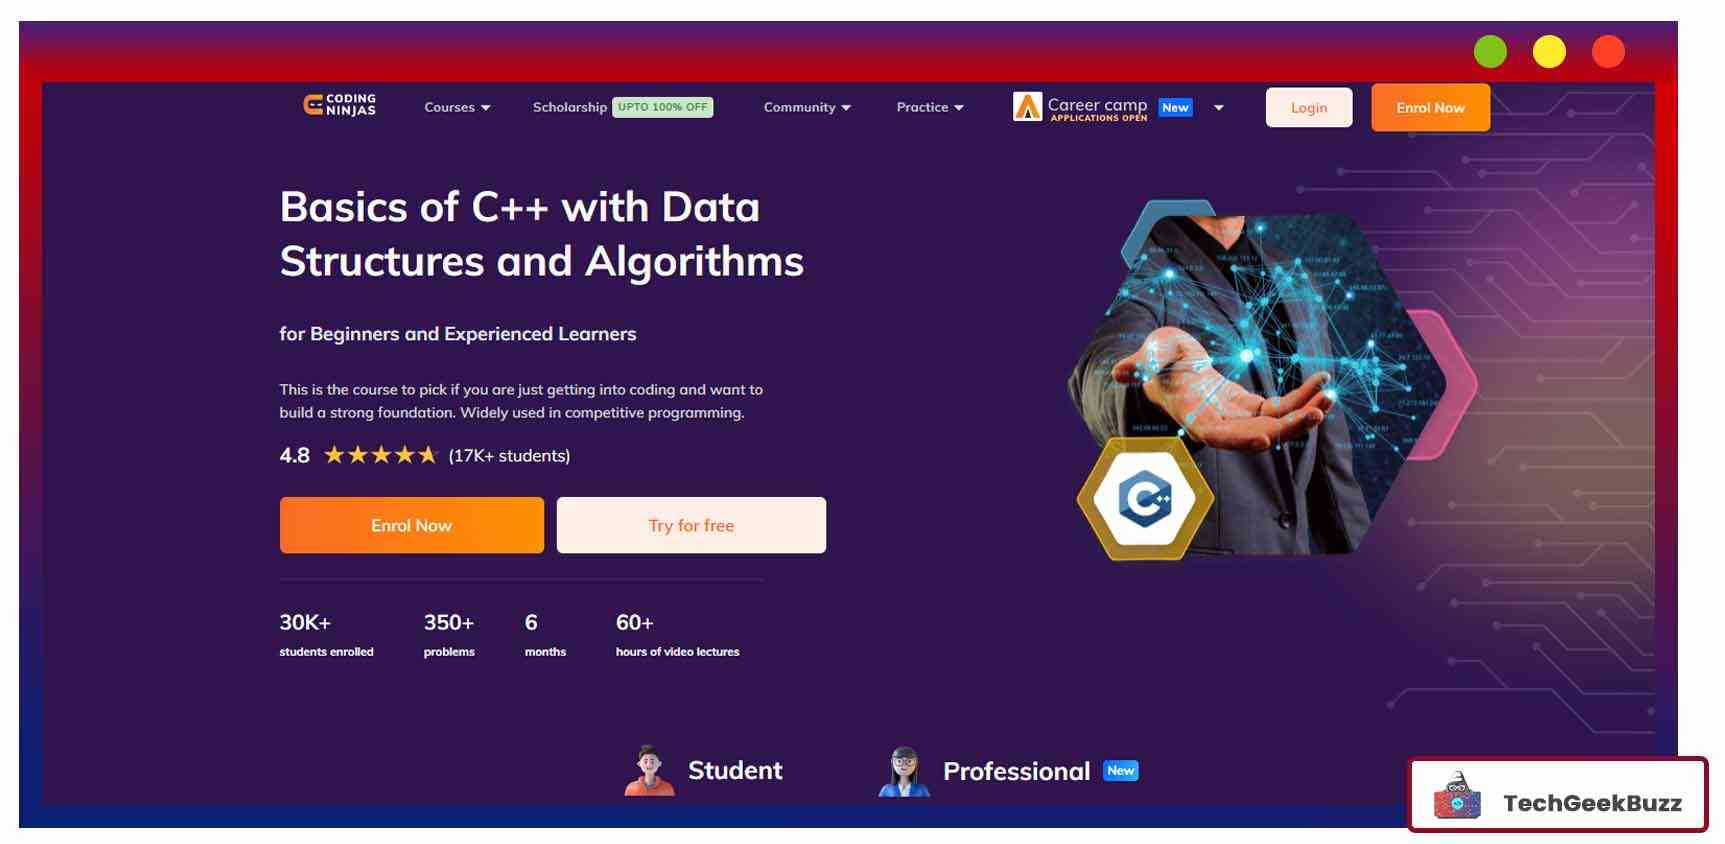 Basics of C++ with Data Structures and Algorithms